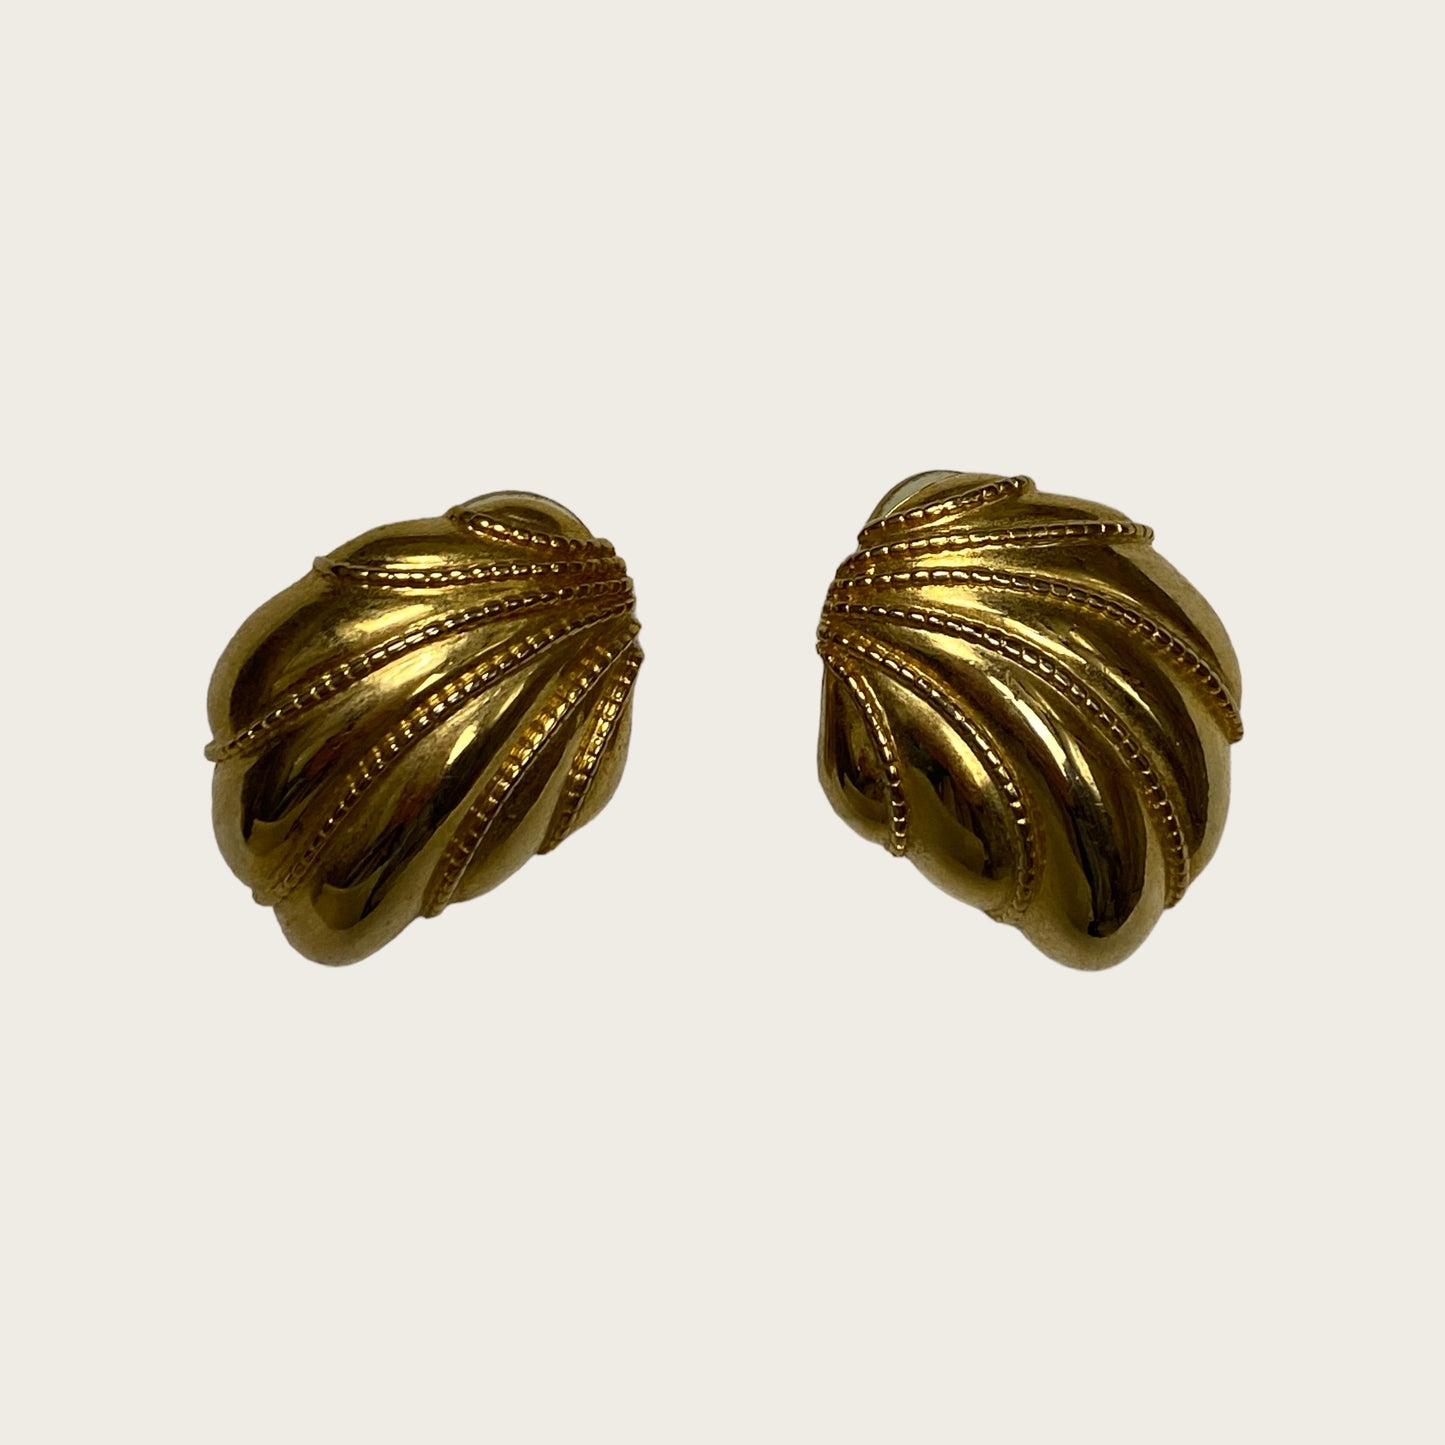 Plated gold vintage earrings